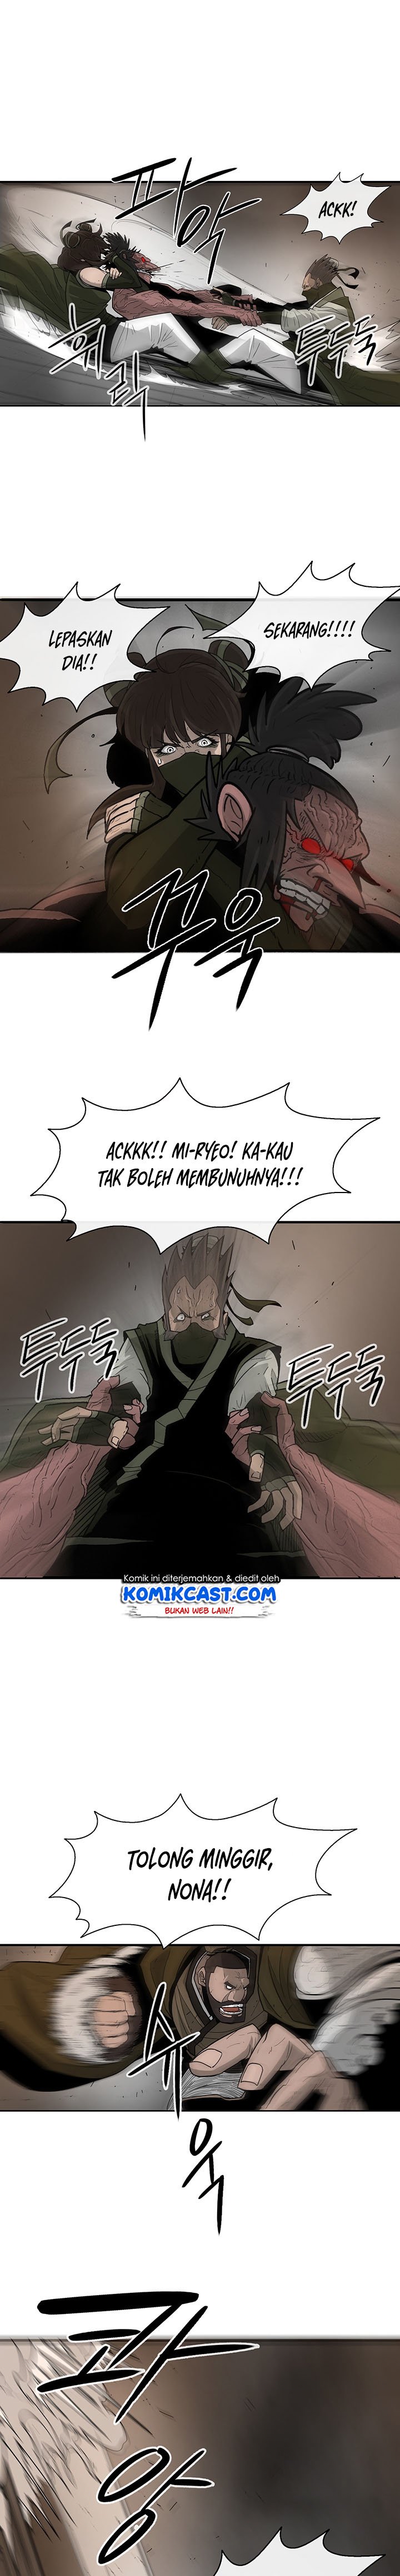 Legend of the Northern Blade Chapter 40